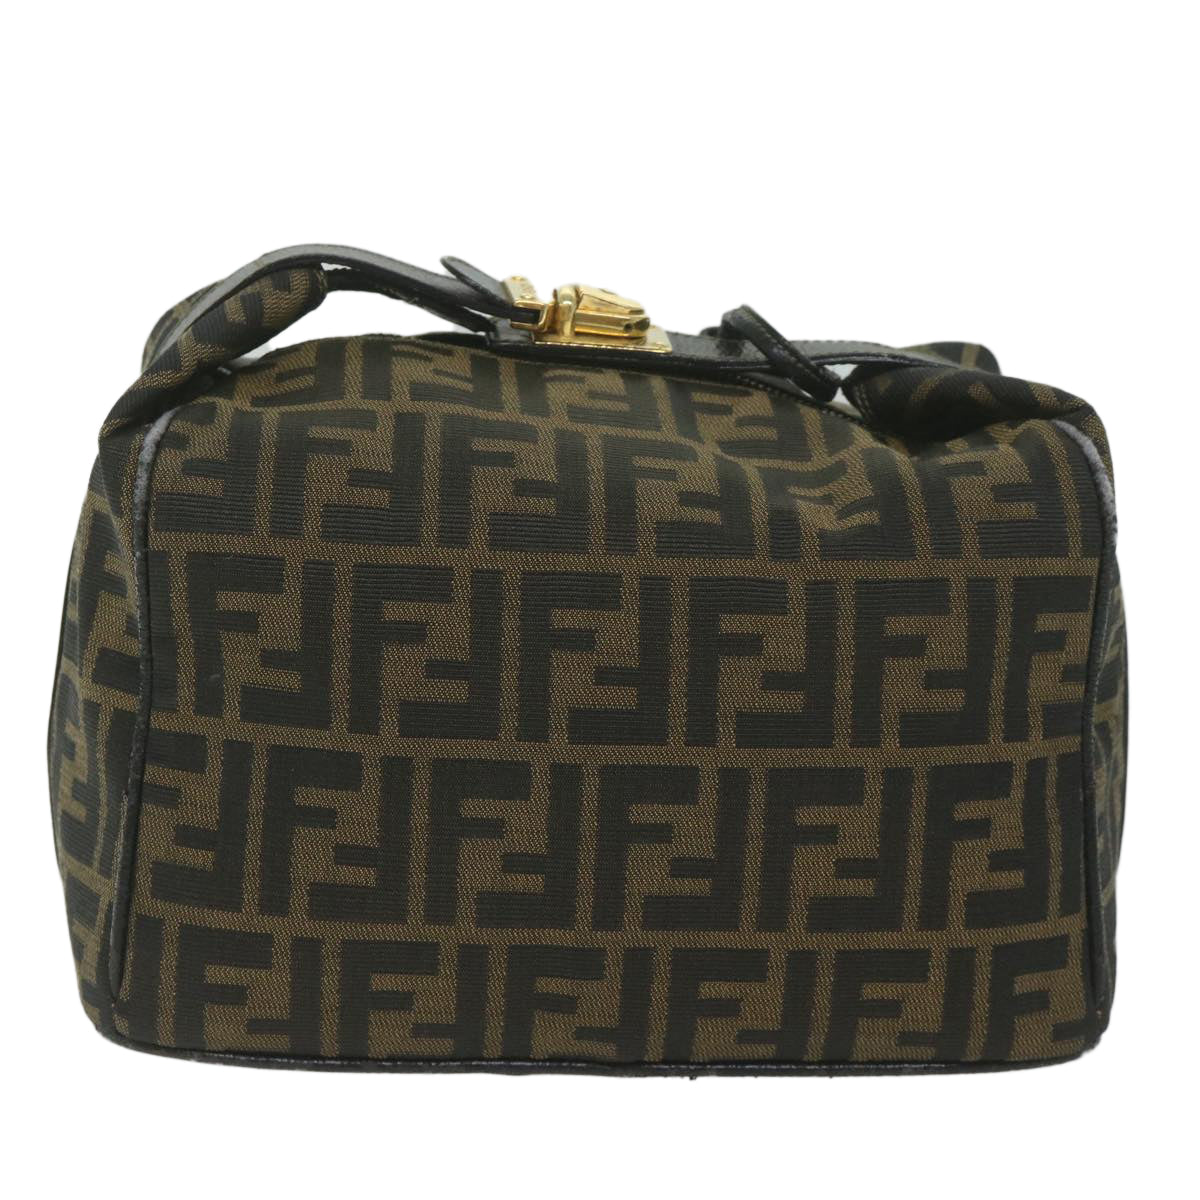 FENDI Zucca Canvas Vanity Cosmetic Pouch Black Brown Auth 61795